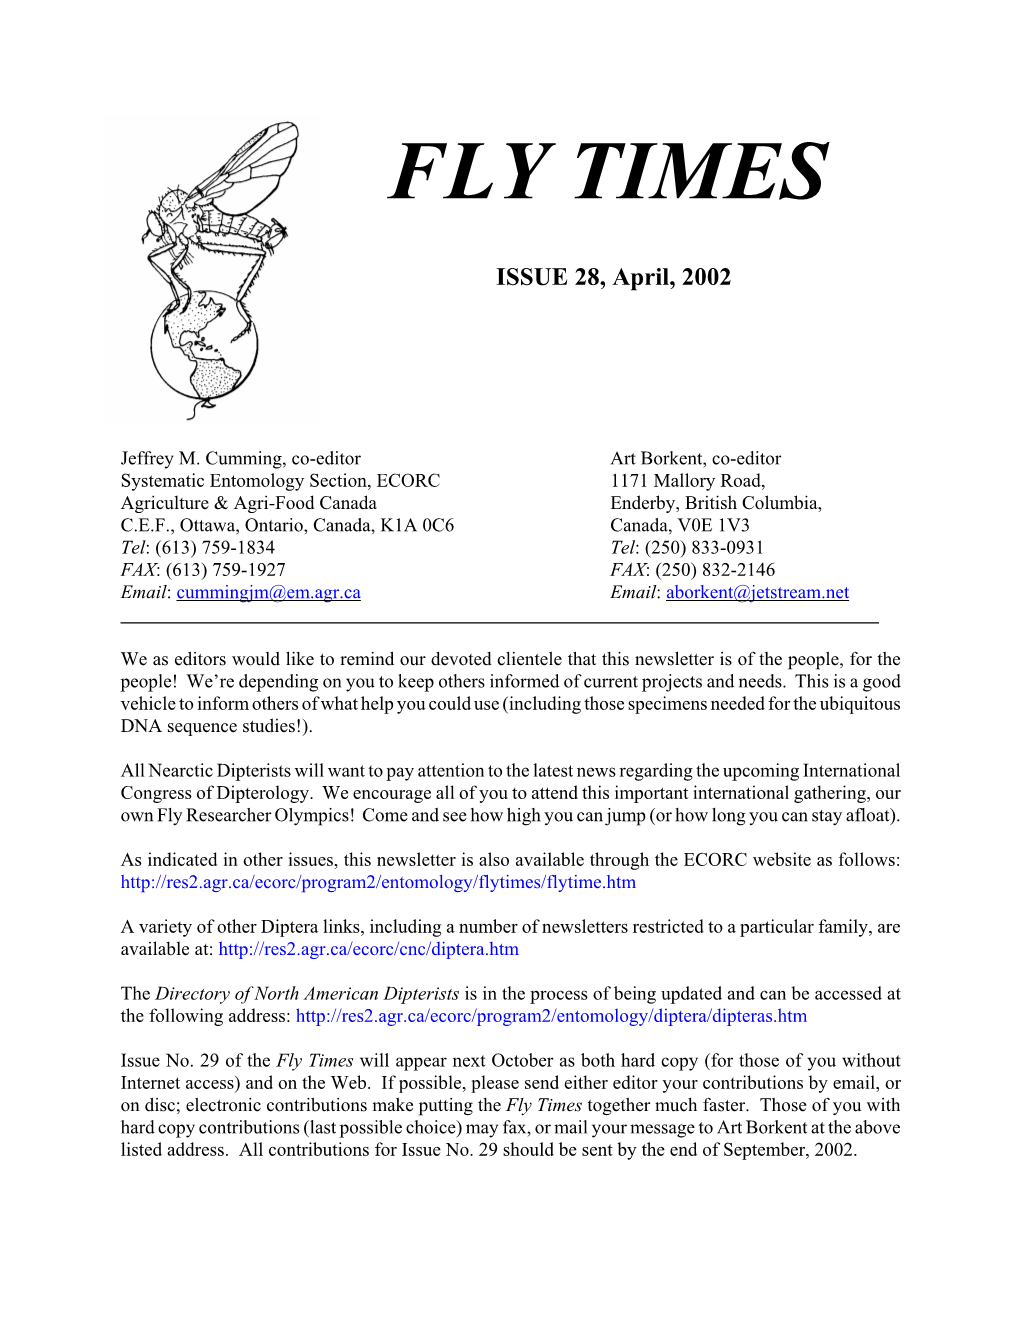 Fly Times Issue 28, April 2002